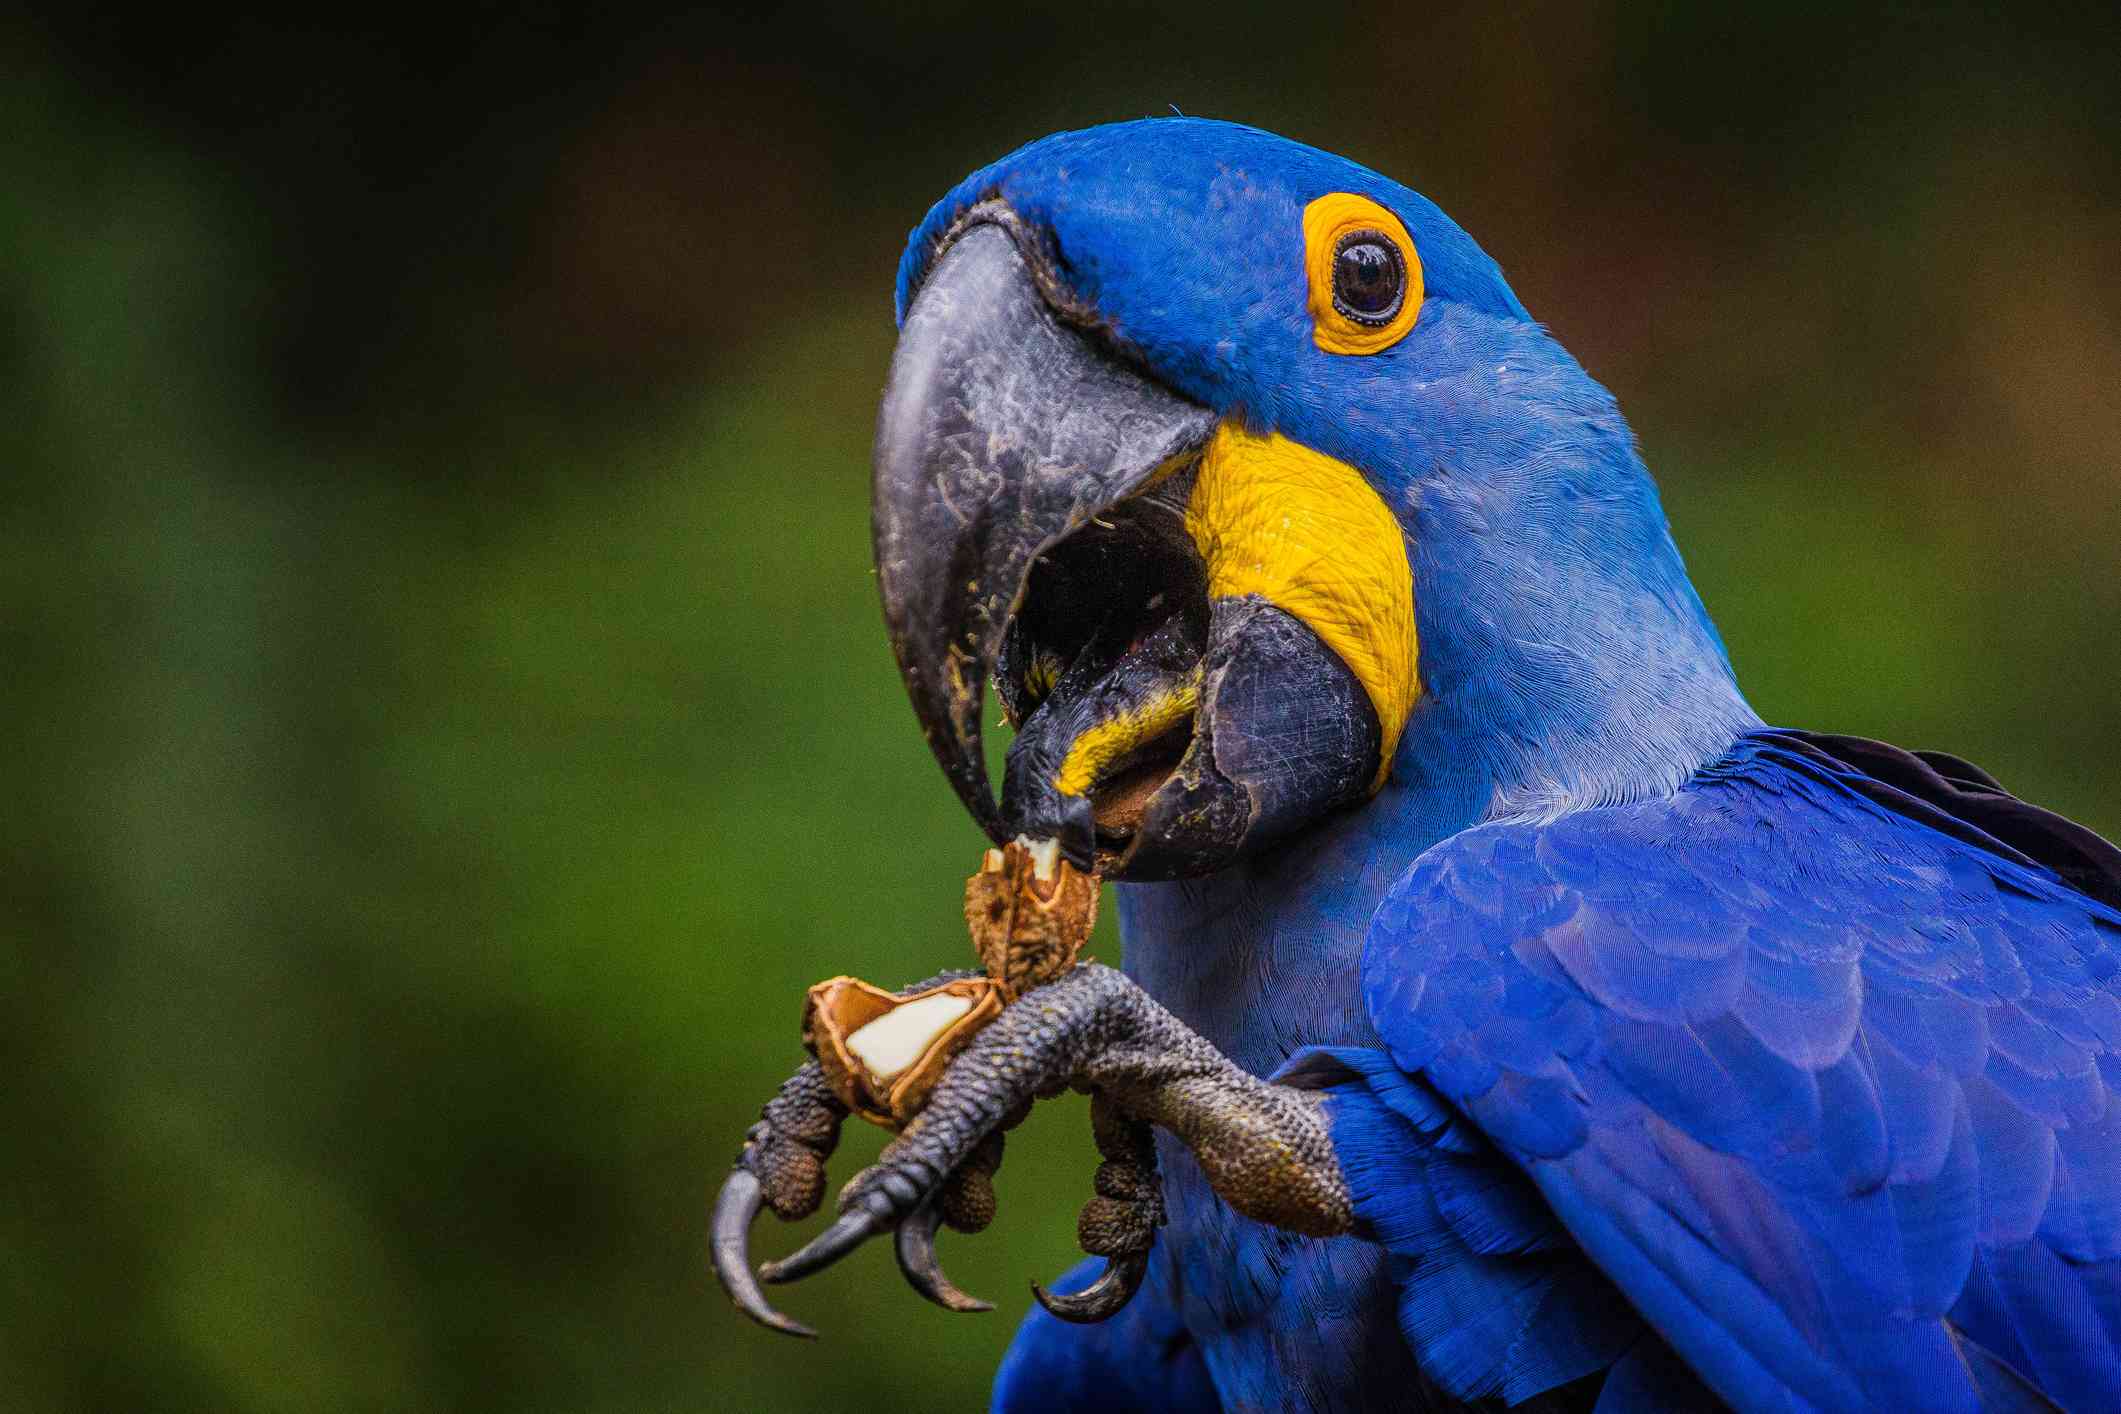 Hyacinth macaw cracking open a shell with its beak.